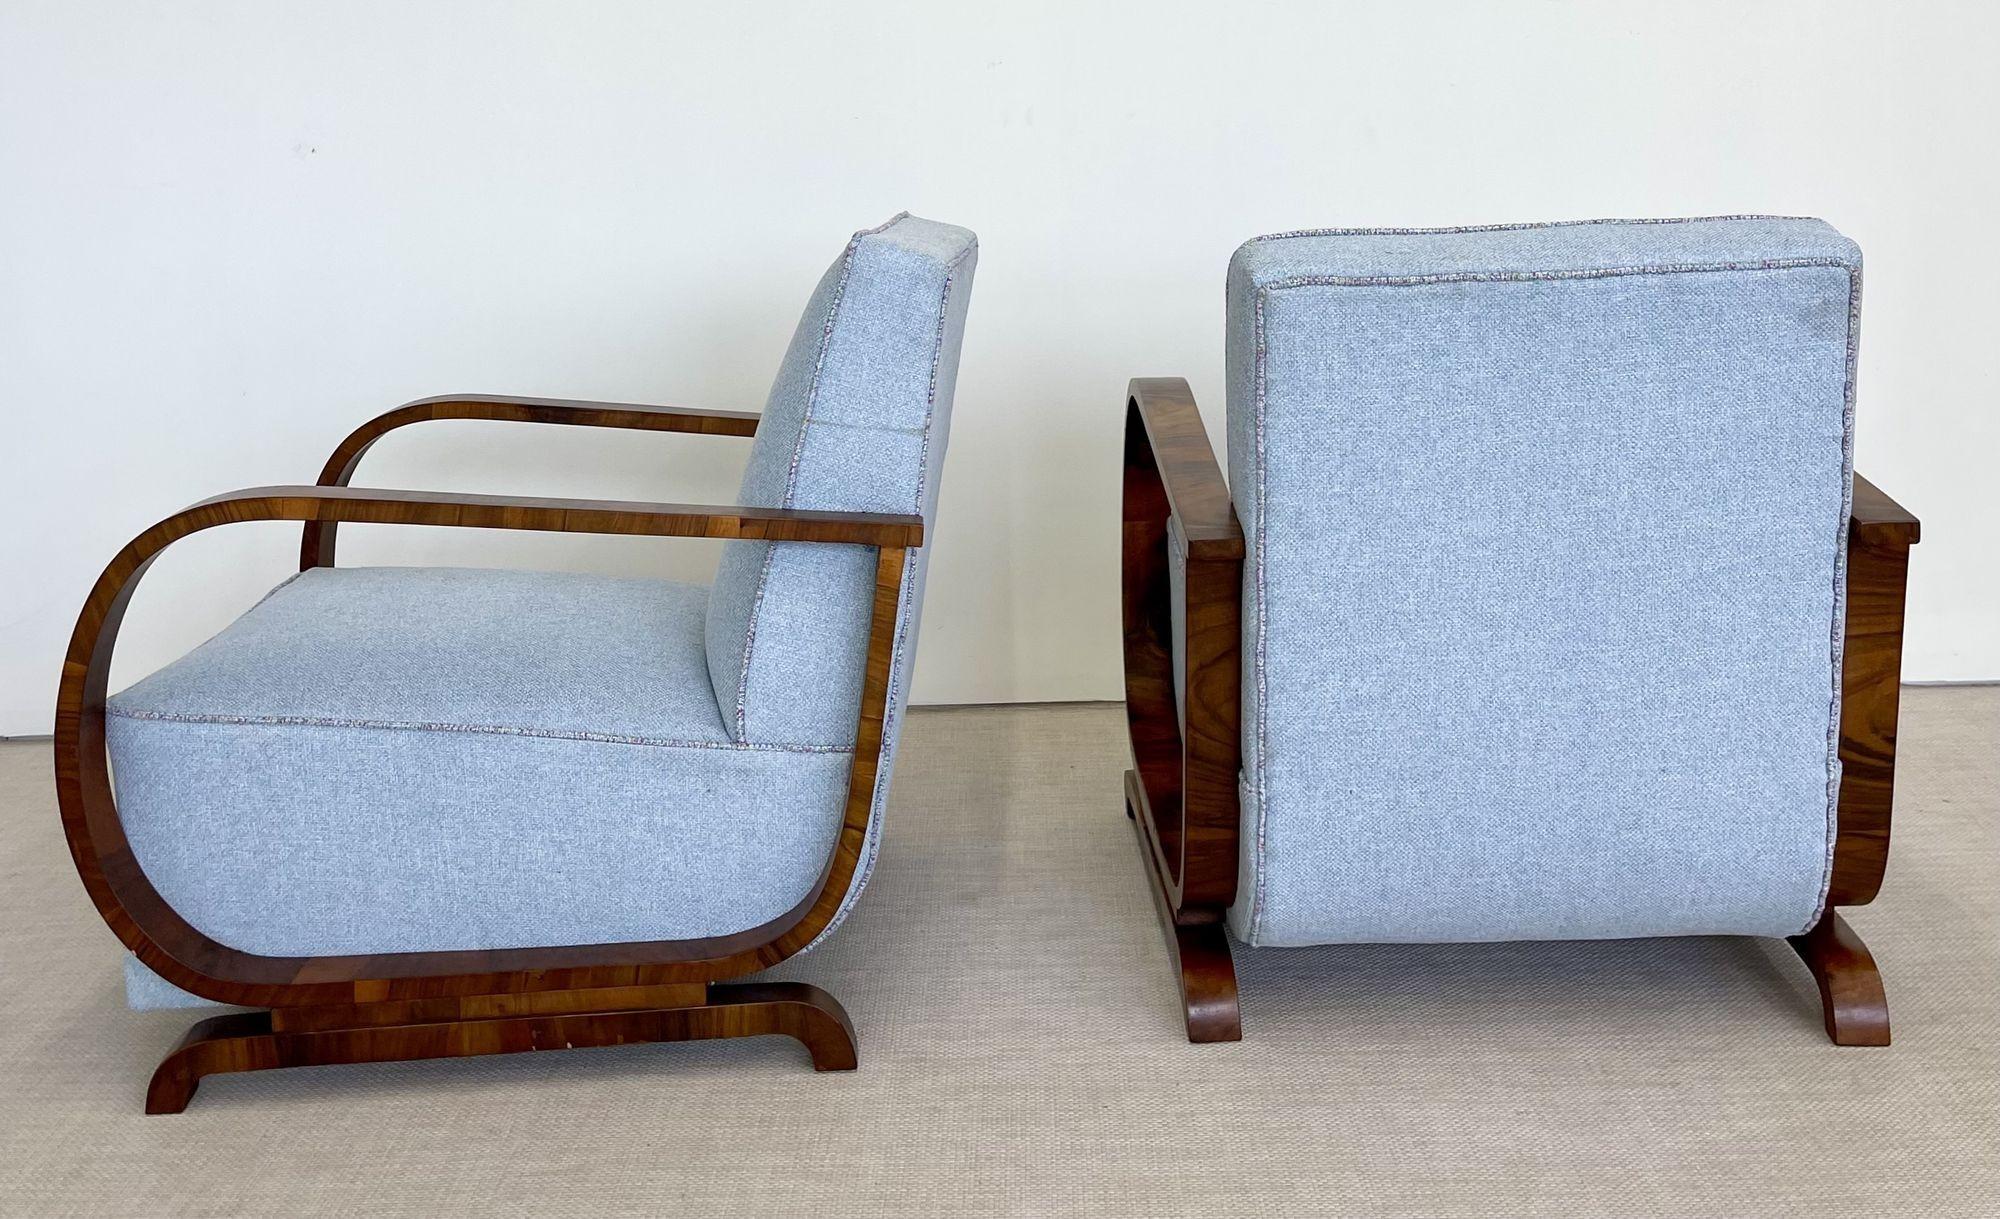 20th Century Pair of Art Deco Lounge / Arm Chairs, Walnut, Fabric, Mid-Century Style, Sweden